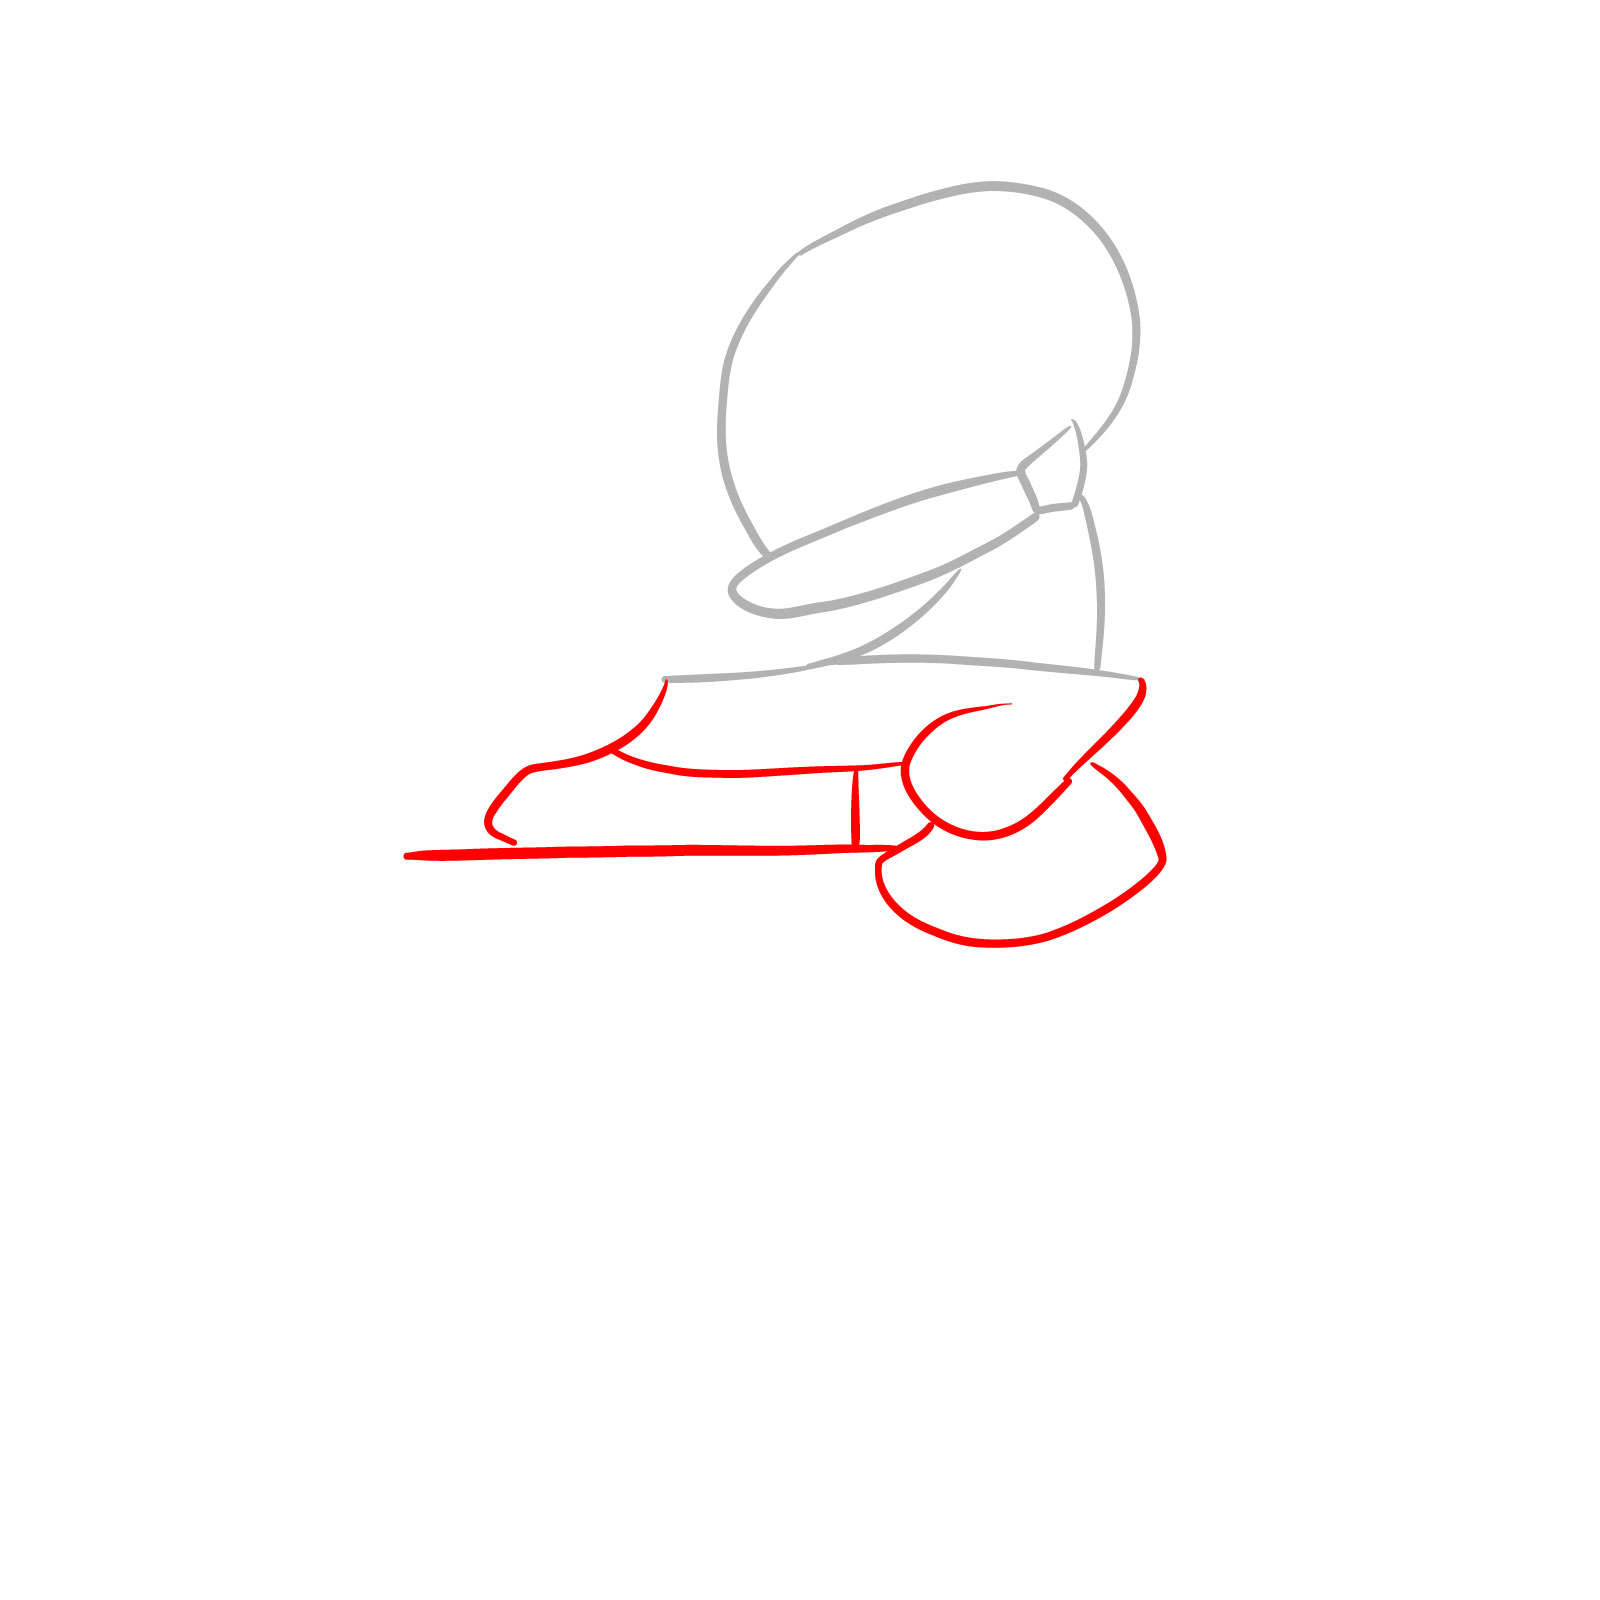 How to draw Pico on the speakers - step 02